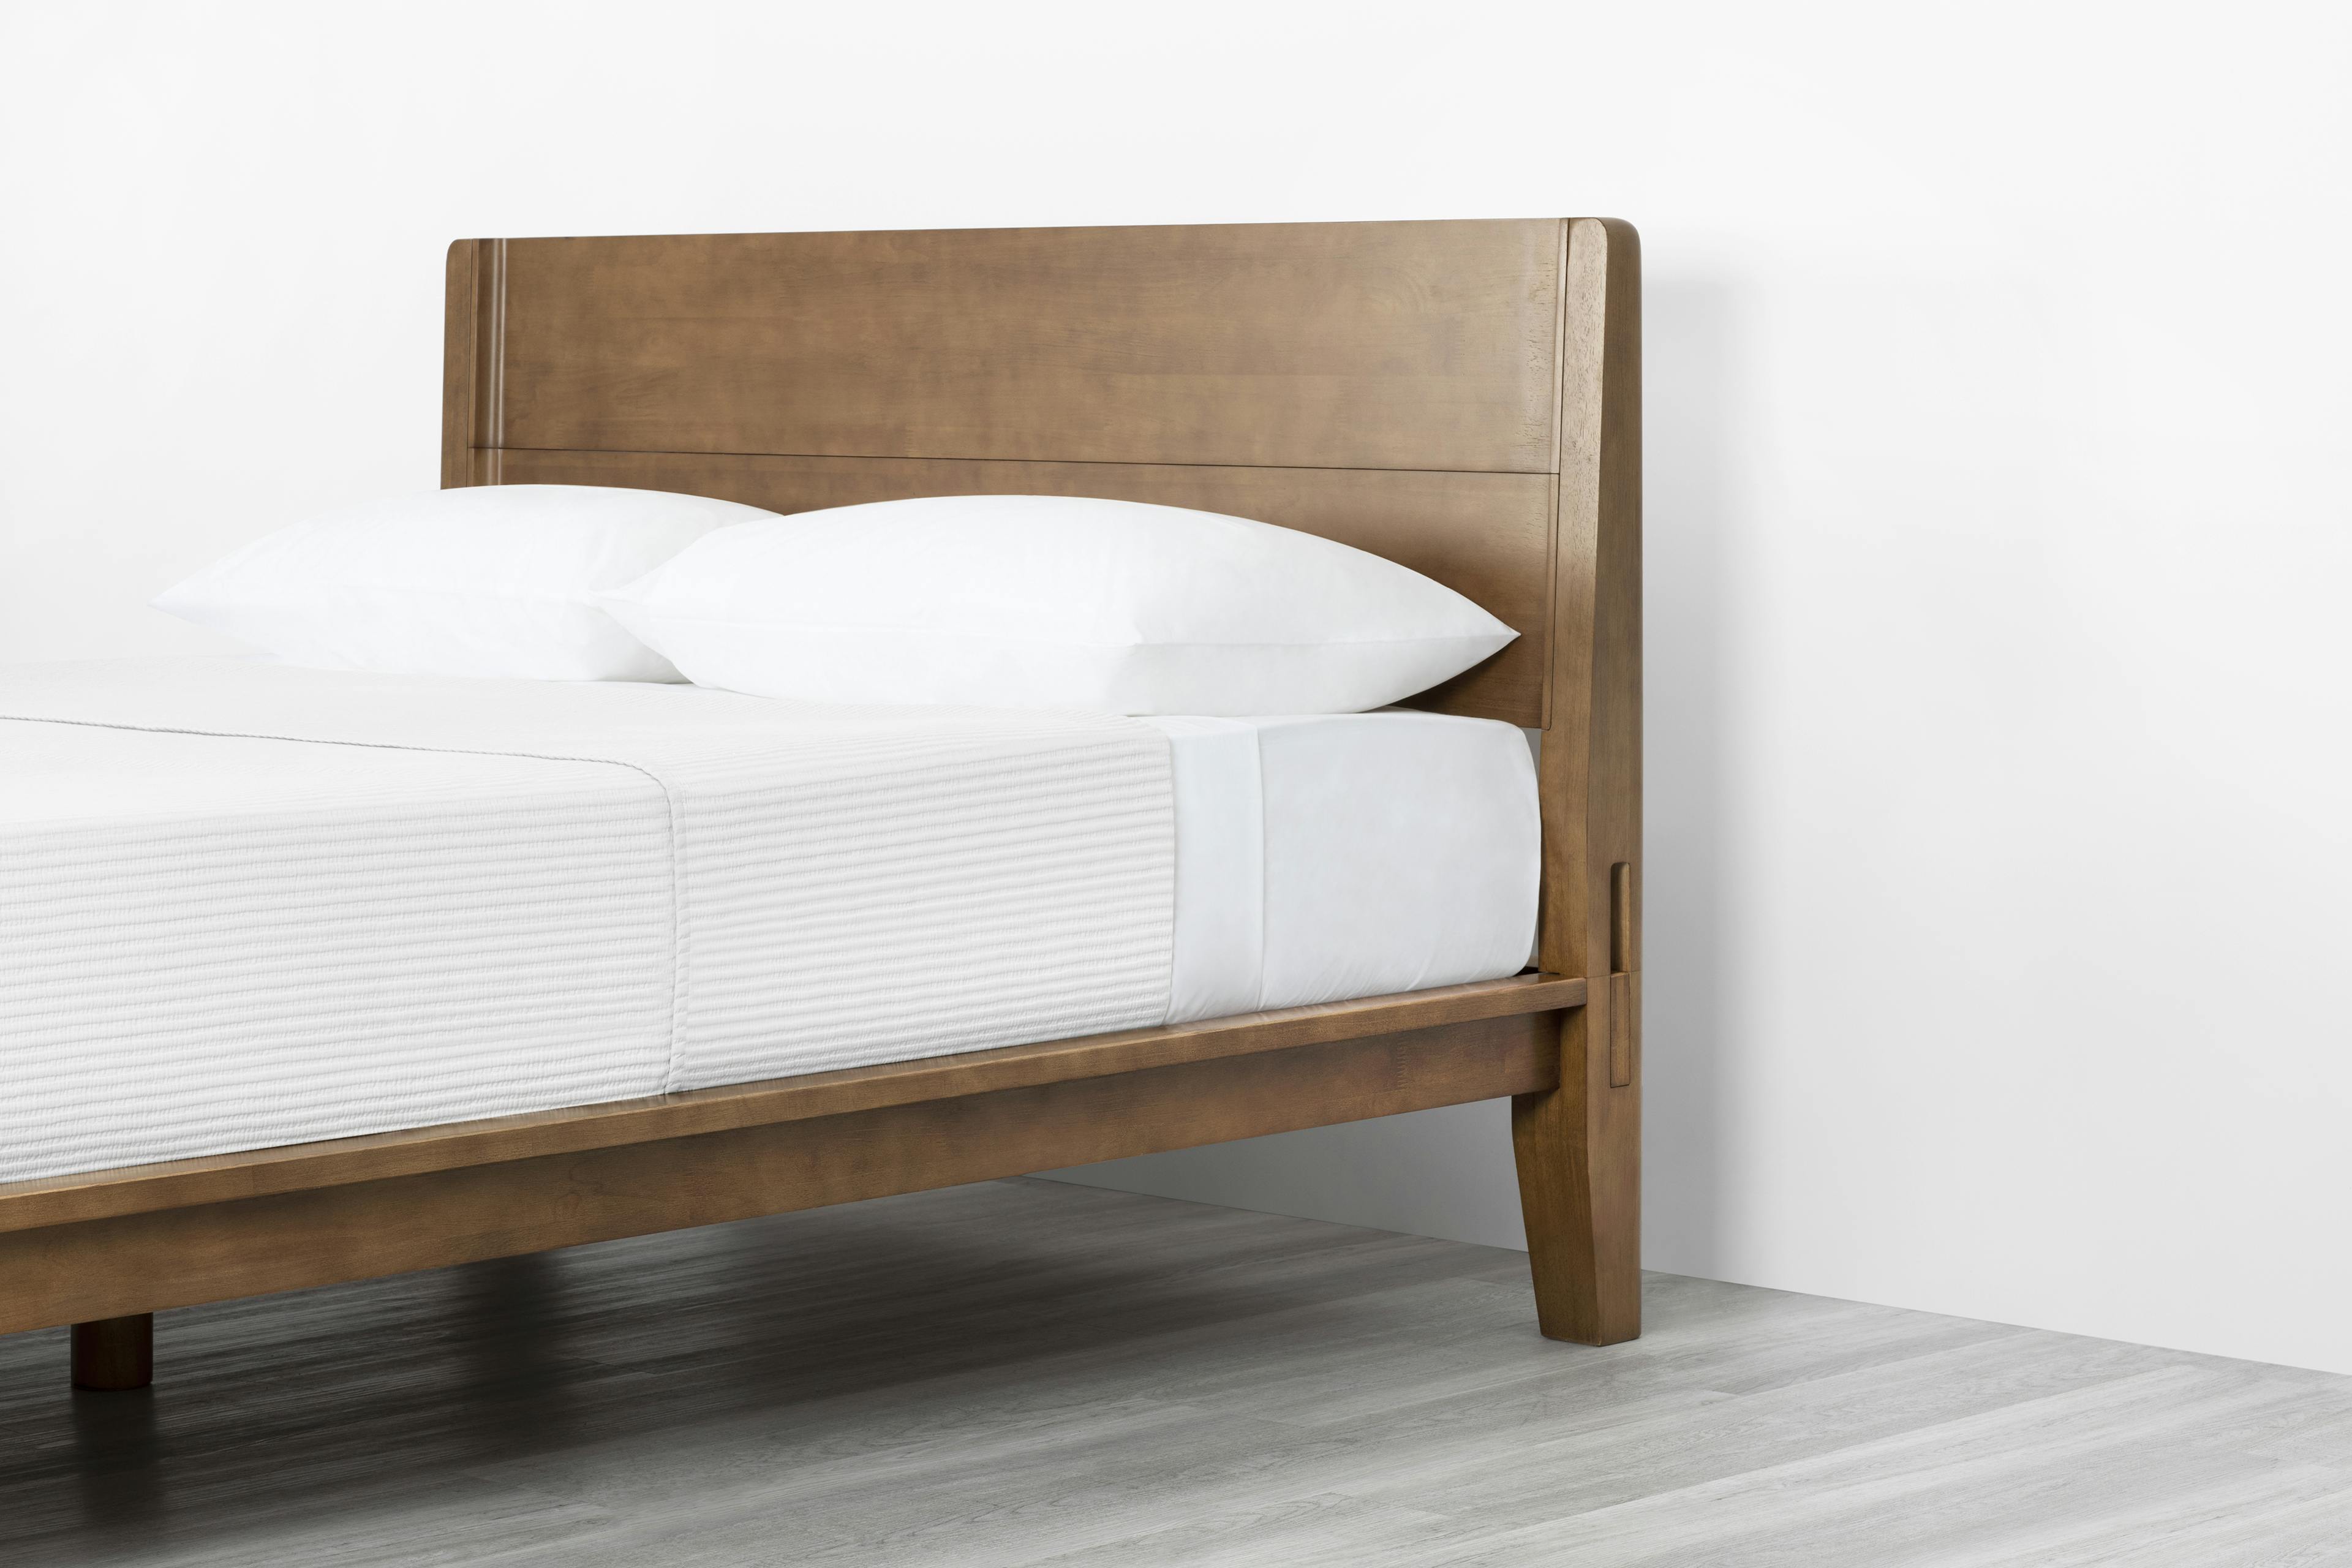 The Headboard Product in Walnut Finish, Angled Detail View